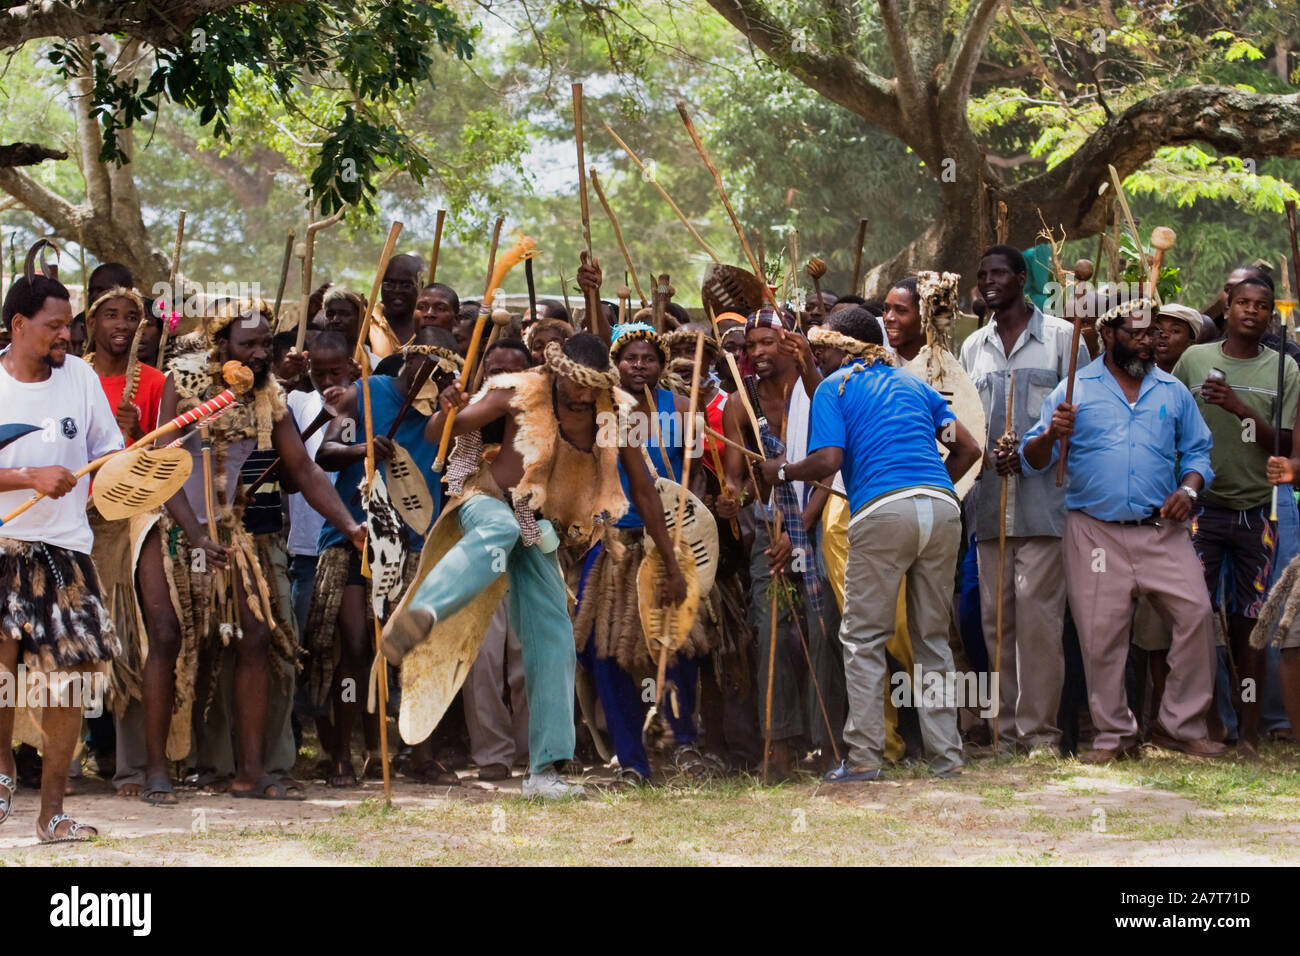 A procession of singing and dancing Zulu men, some in traditional attire of animal skin aprons and headbands, with traditional weapons like knobkierie. Stock Photo